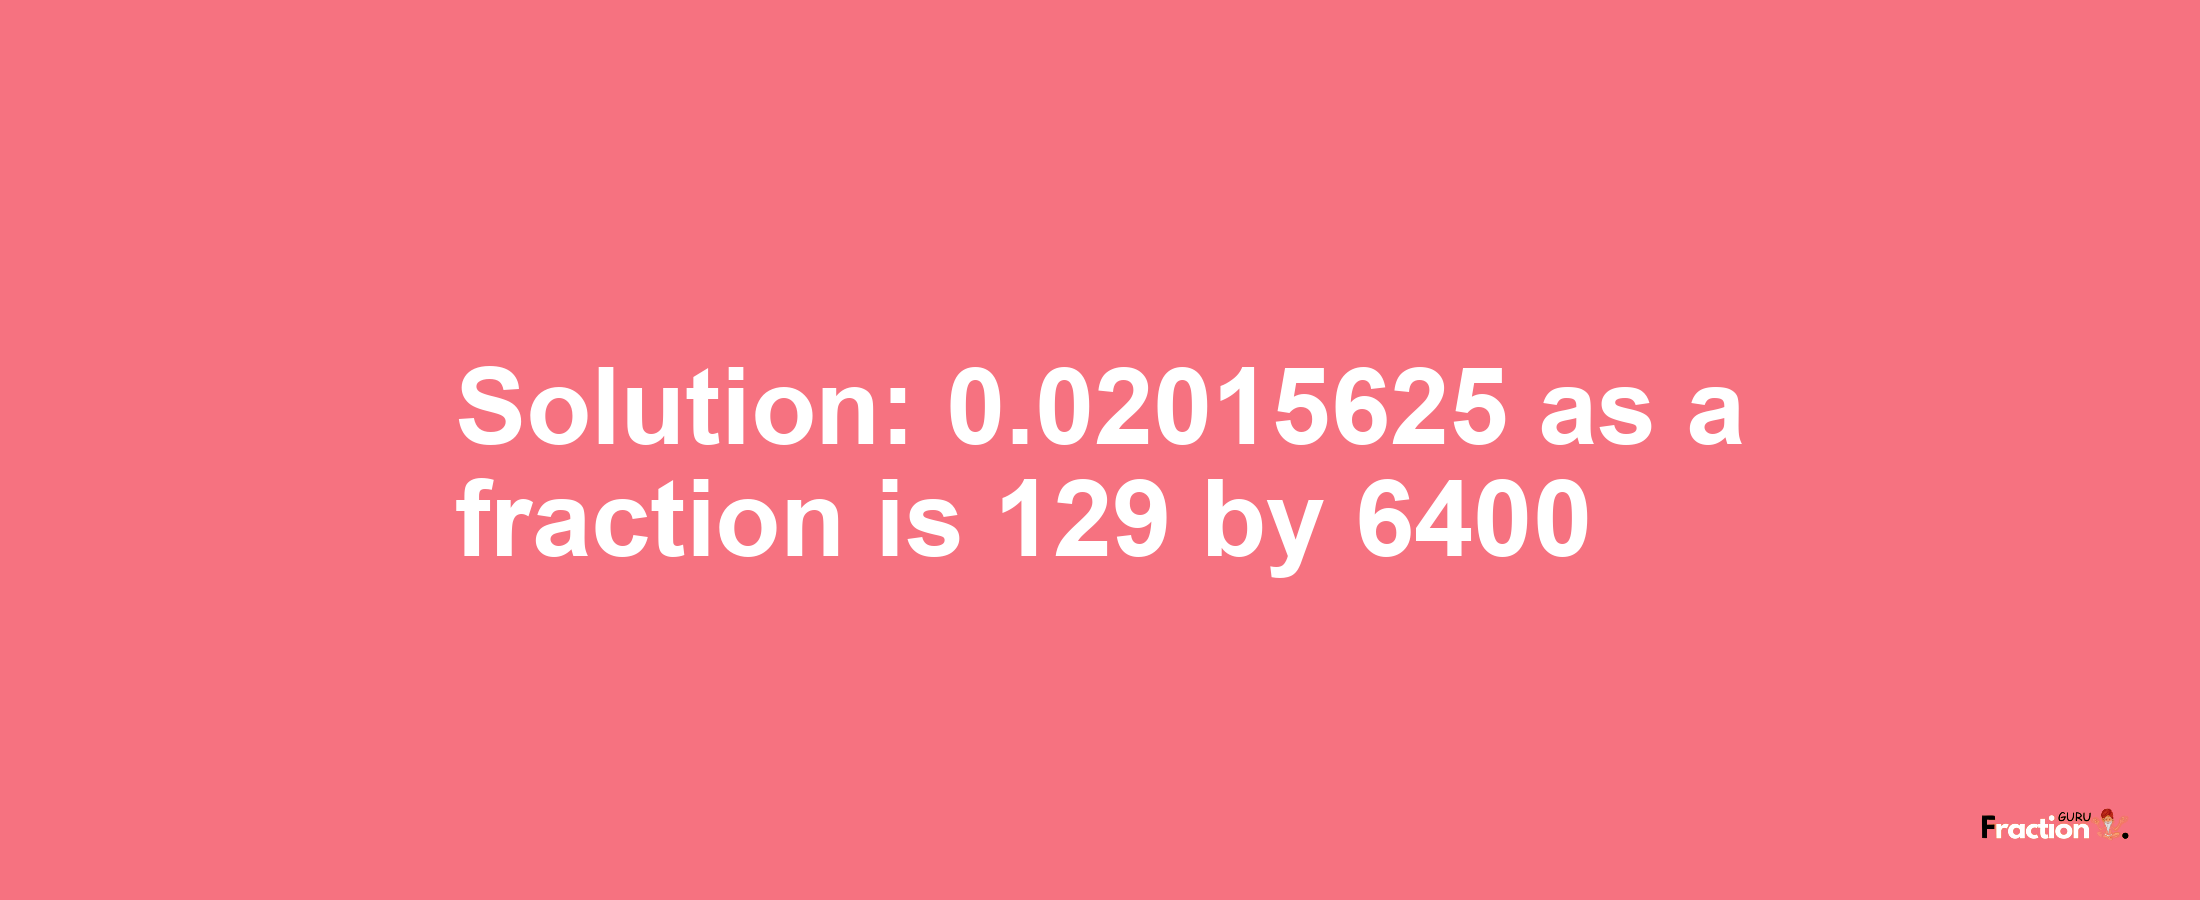 Solution:0.02015625 as a fraction is 129/6400